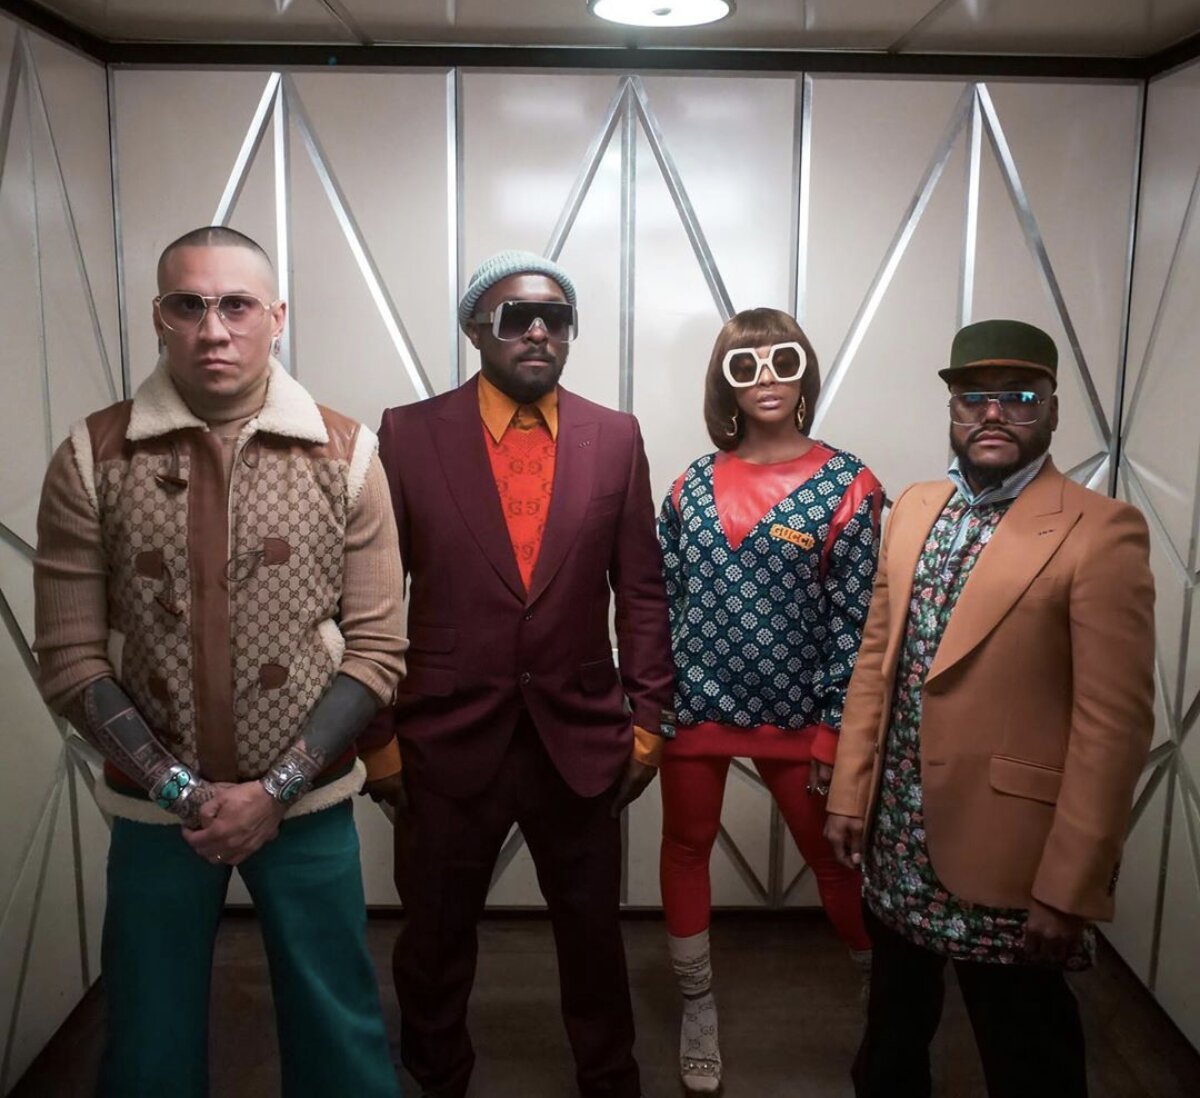 J. レイ・ソウルを加えた新生ブラック・アイド・ピーズ（画像は『Black Eyed Peas　2020年5月5日付Instagram「An elevator opens and you see these iconic four insideAn elevator opens and you see these iconic four inside」』のスクリーンショット）